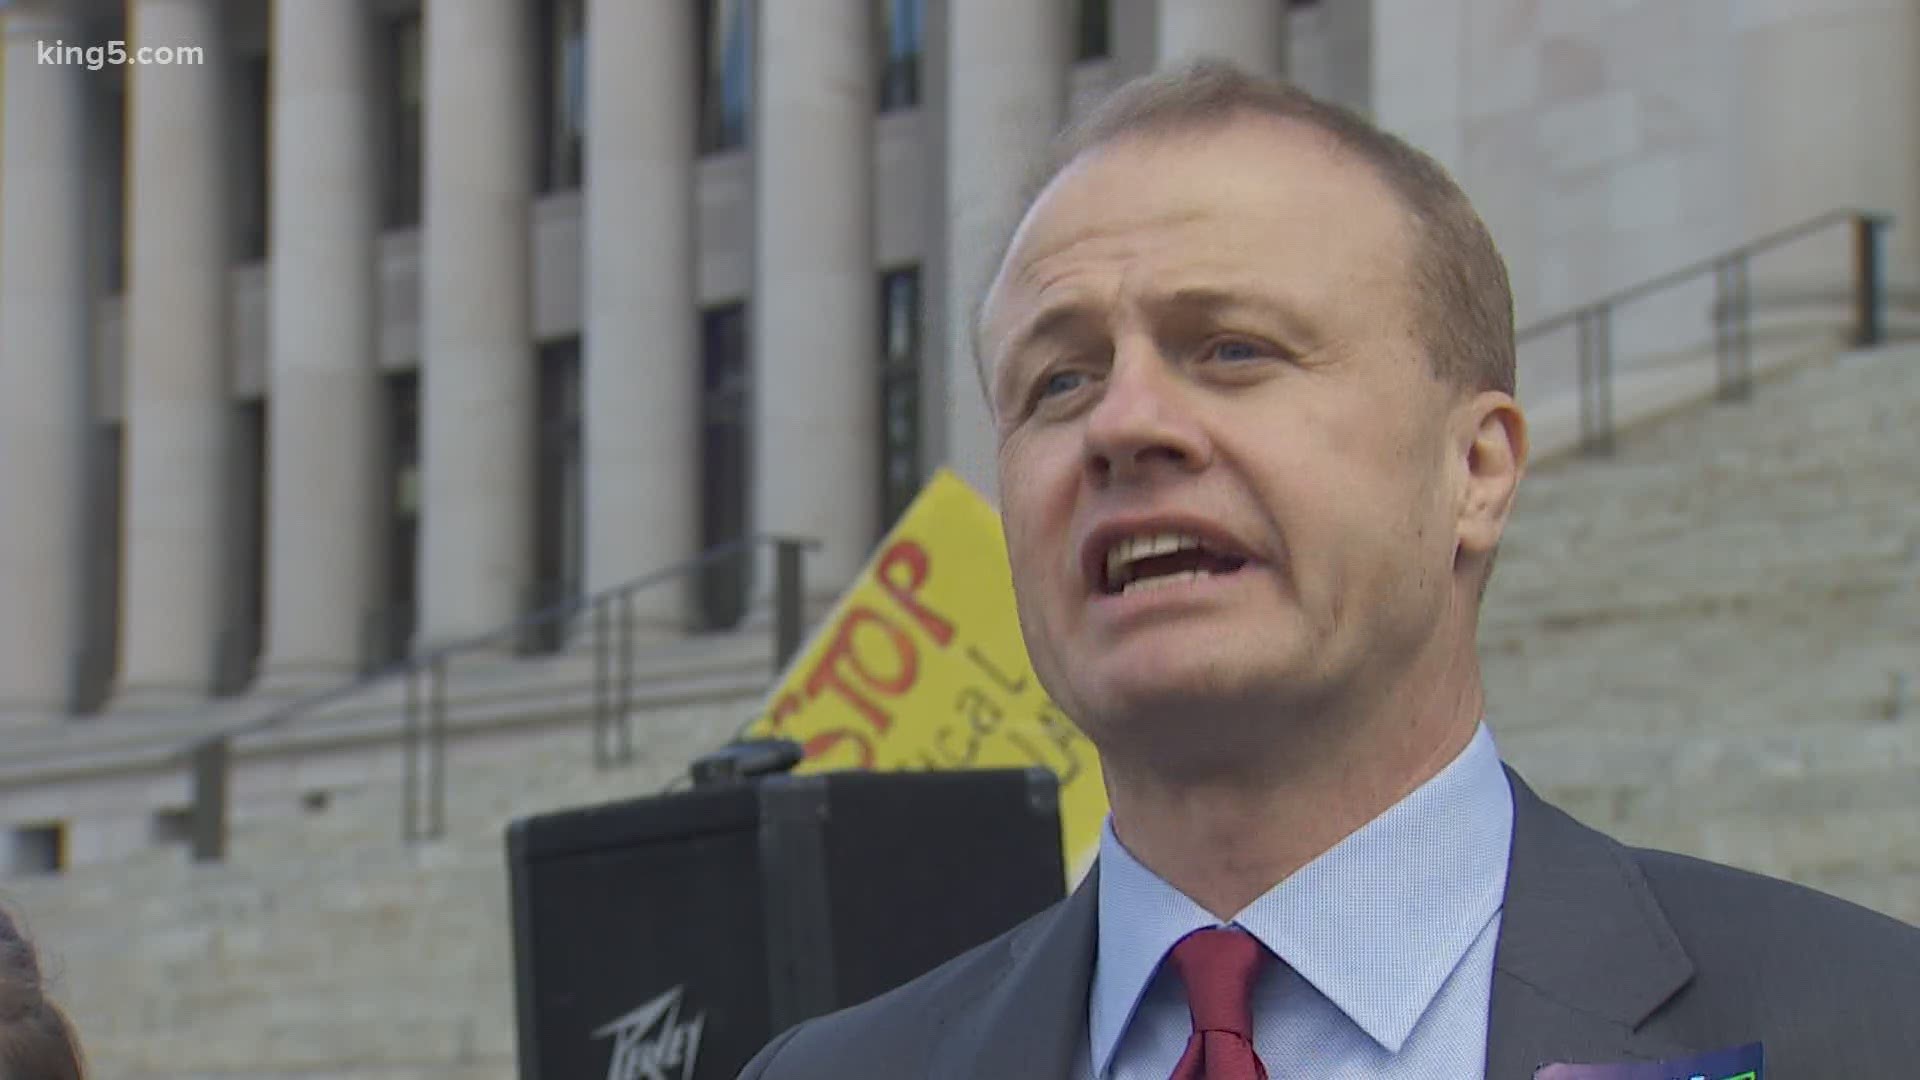 Longtime initiative sponsor, Tim Eyman, officially launched his gubernatorial campaign on the Capitol's steps Thursday.